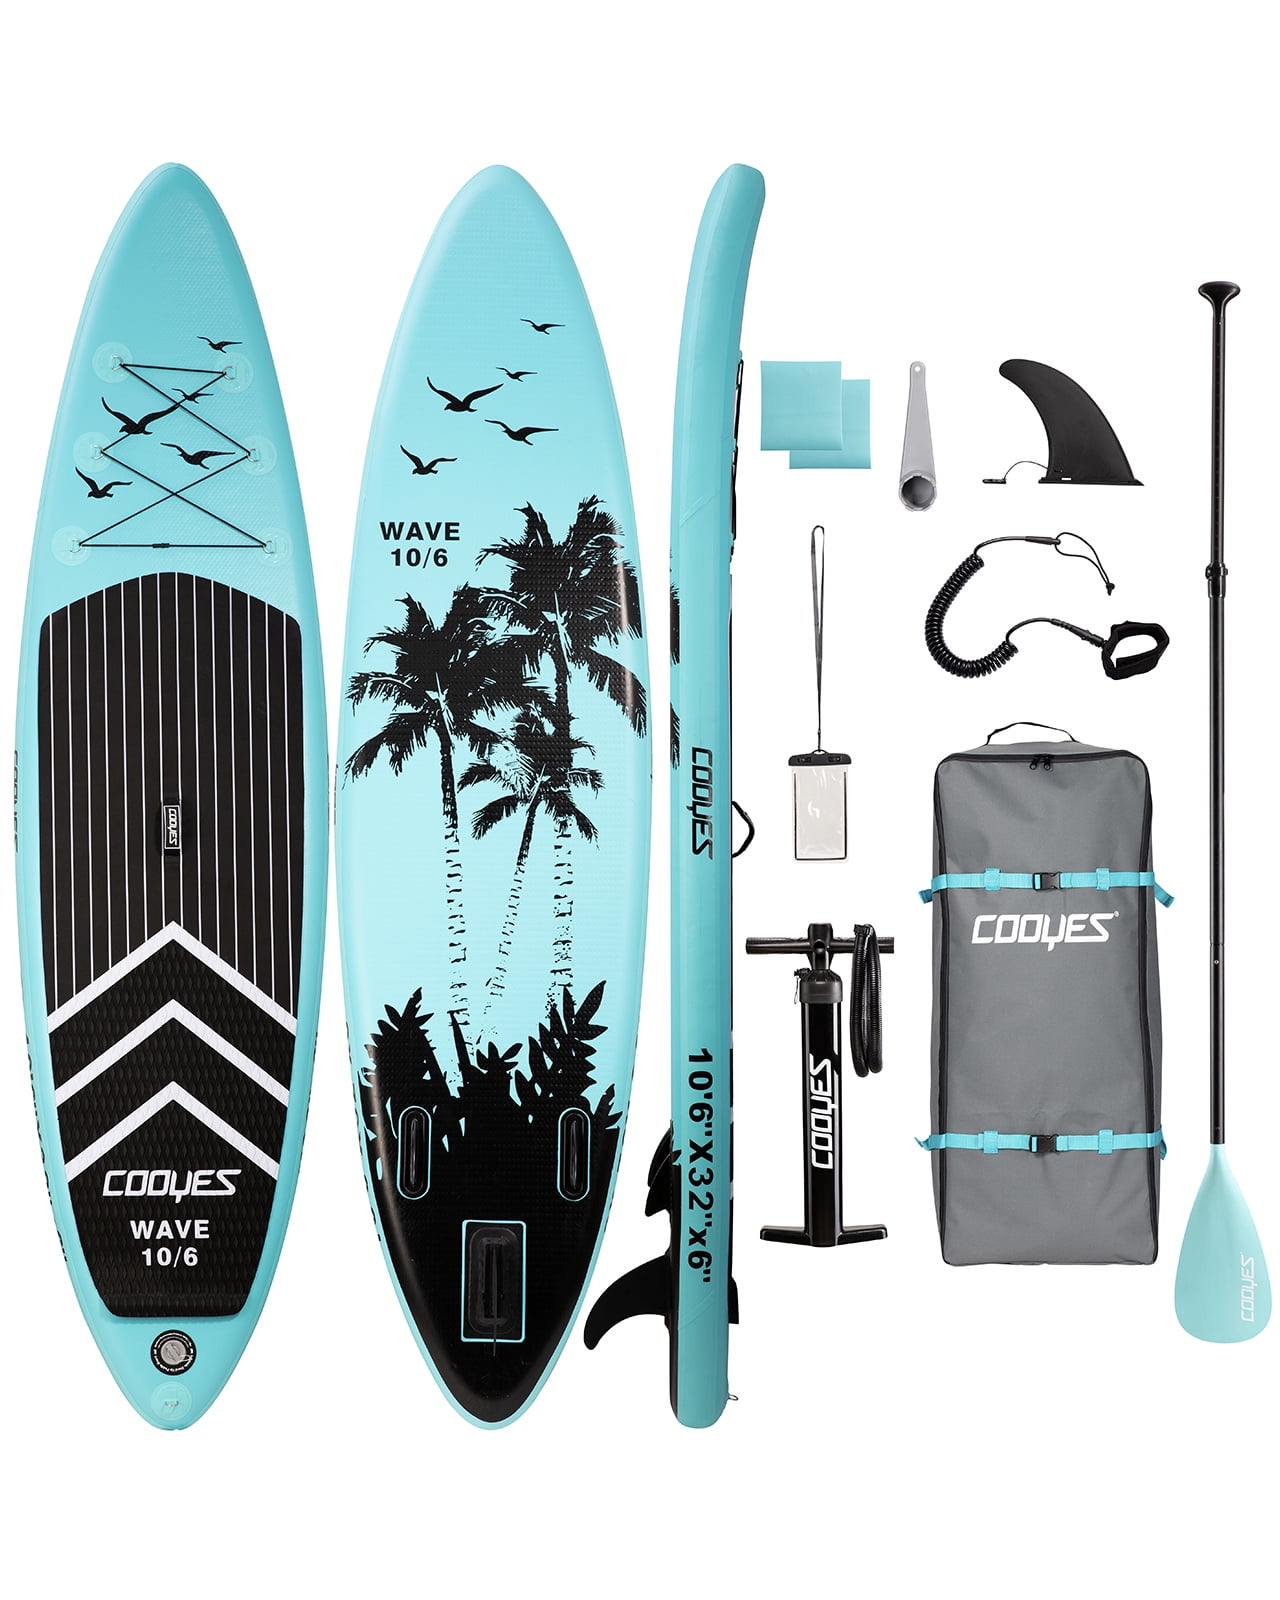 Spot surfboard inflatable sup direct sales new_Surfboard Supplier